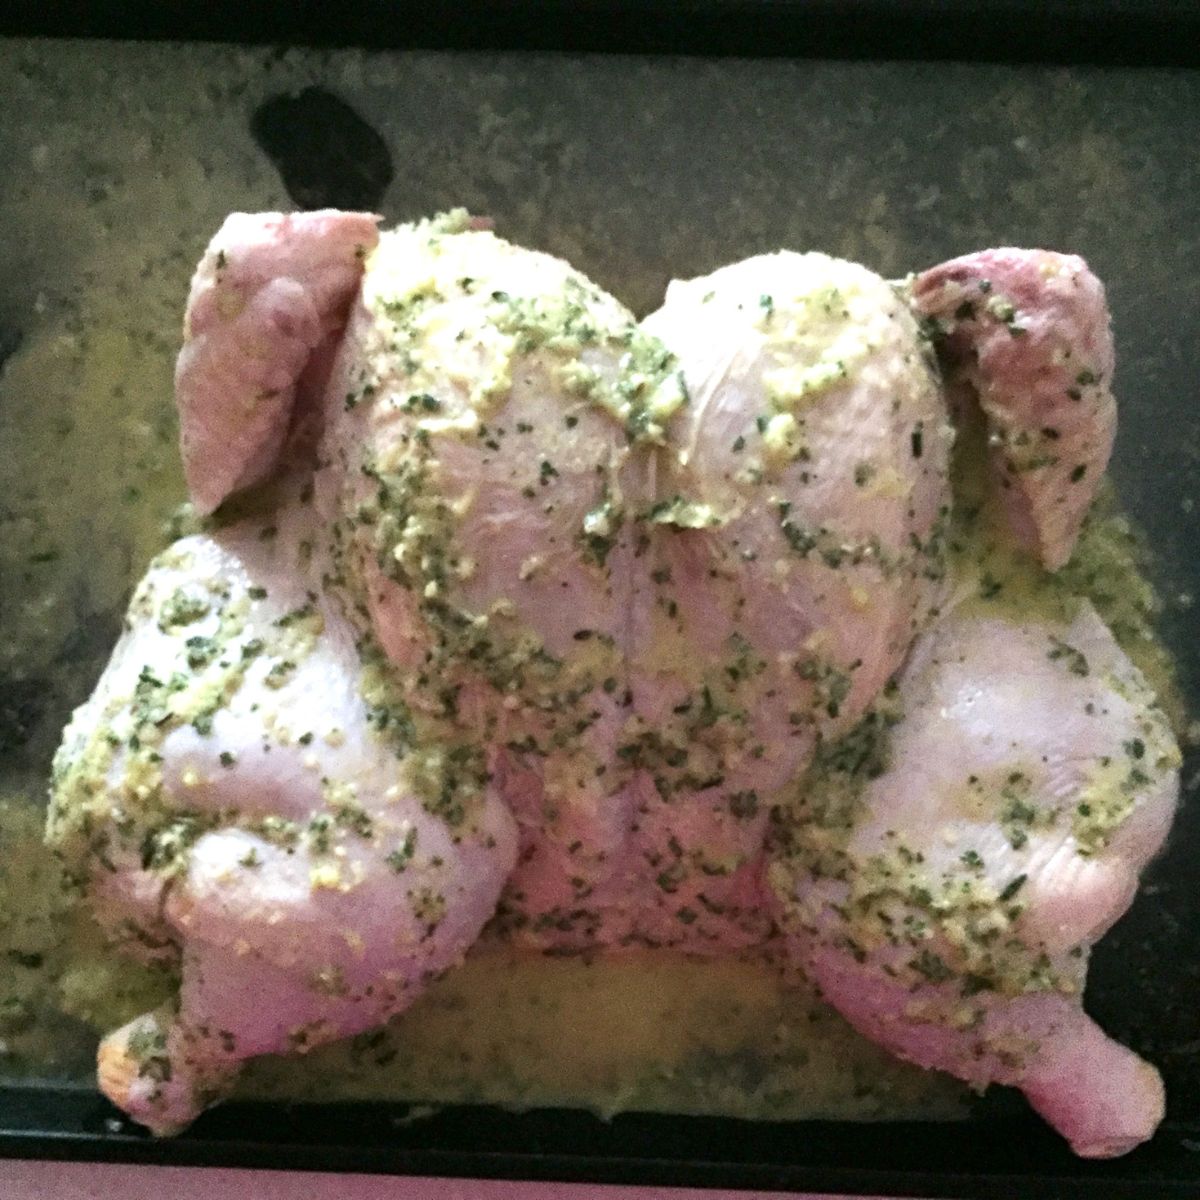 flavoring the chicken before grilling.